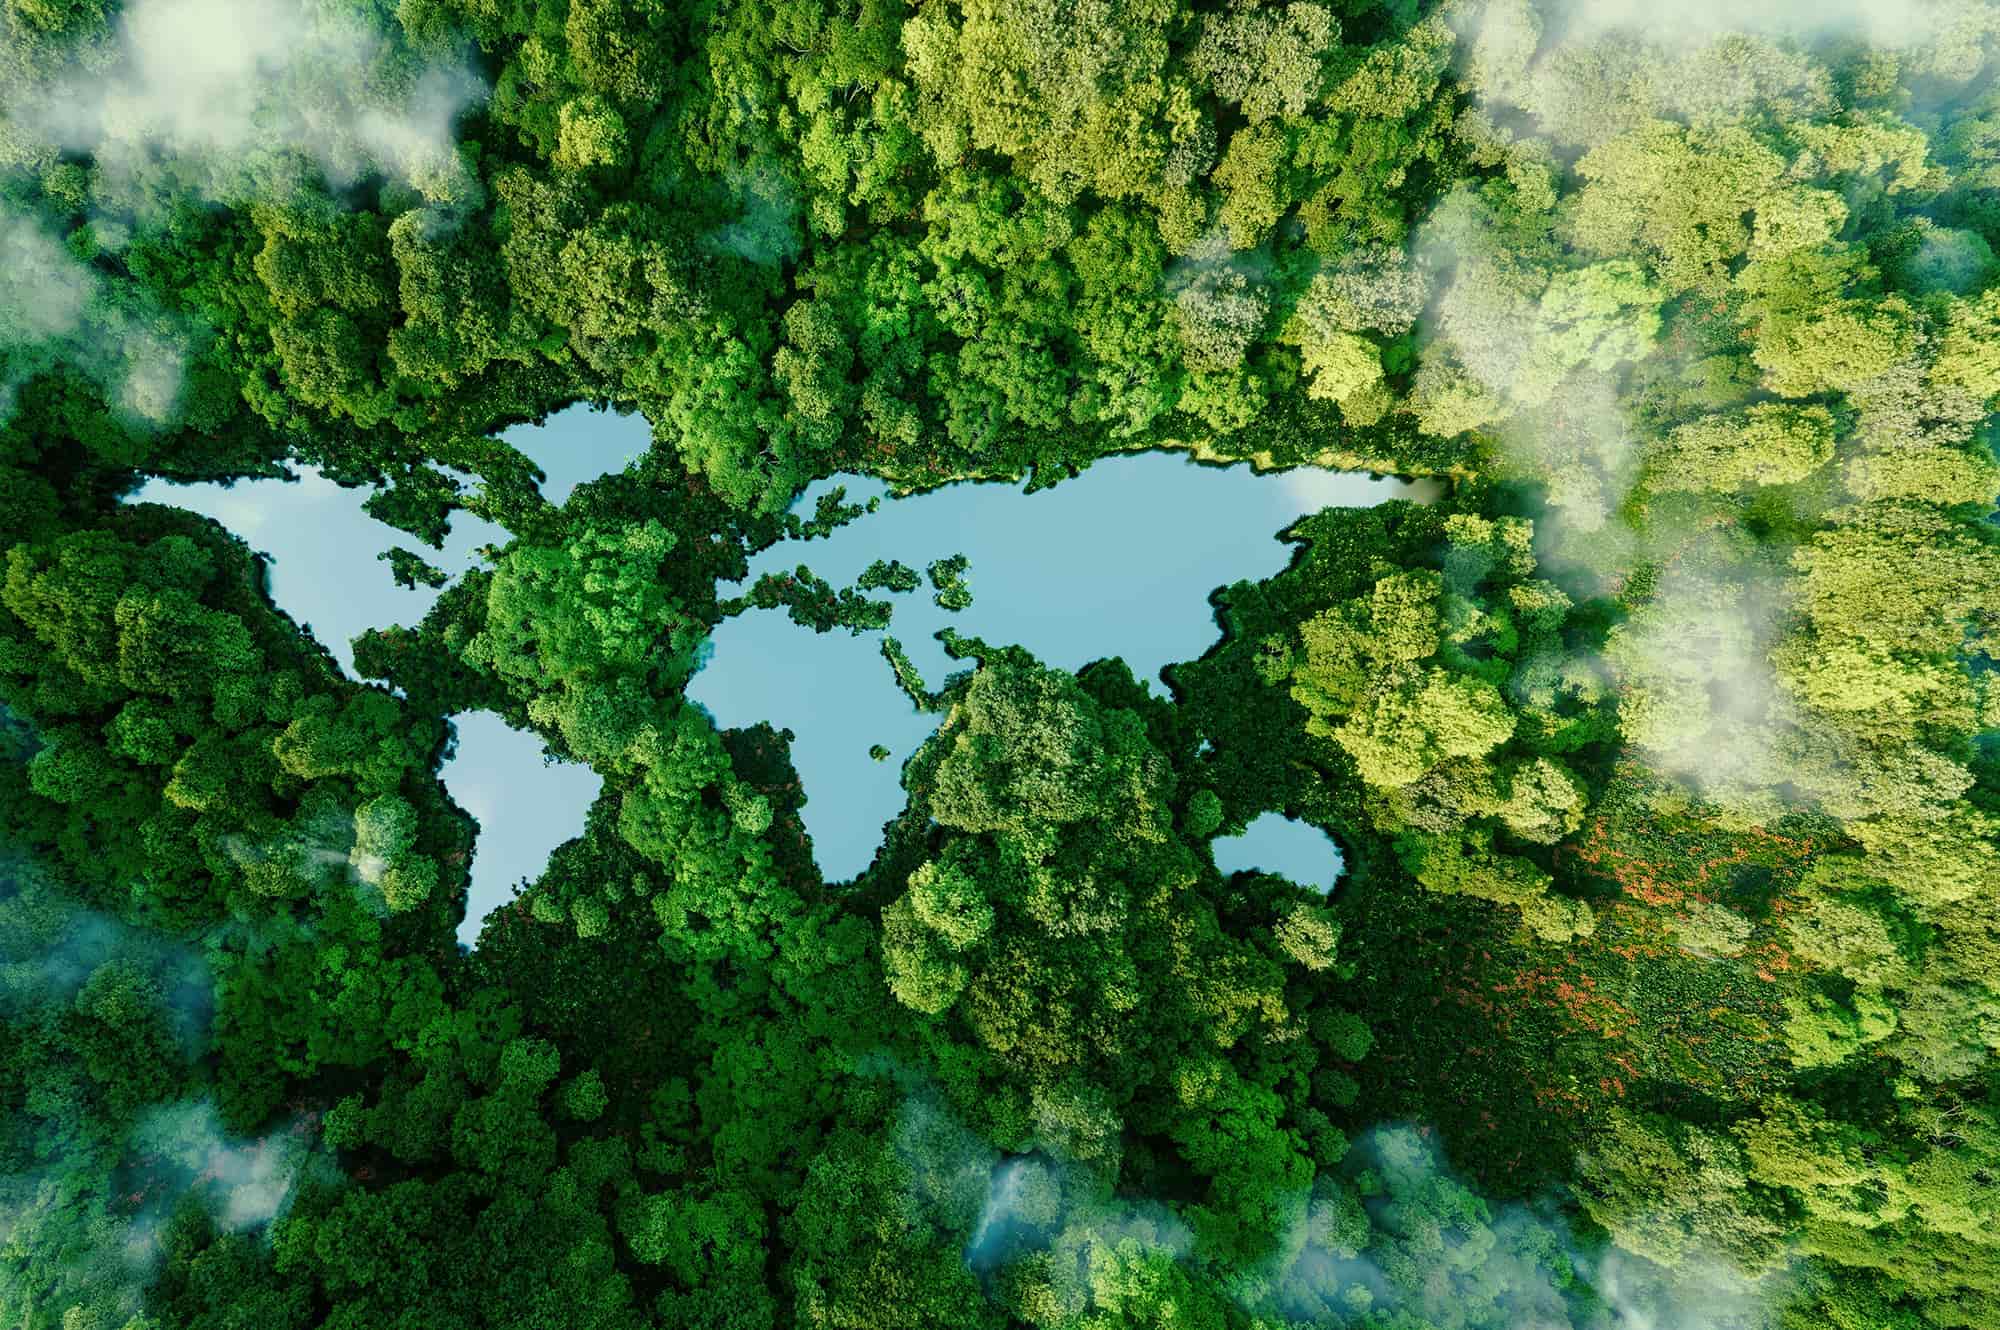 Abstract graphic depicting earth's continents as lakes surrounded by a forest